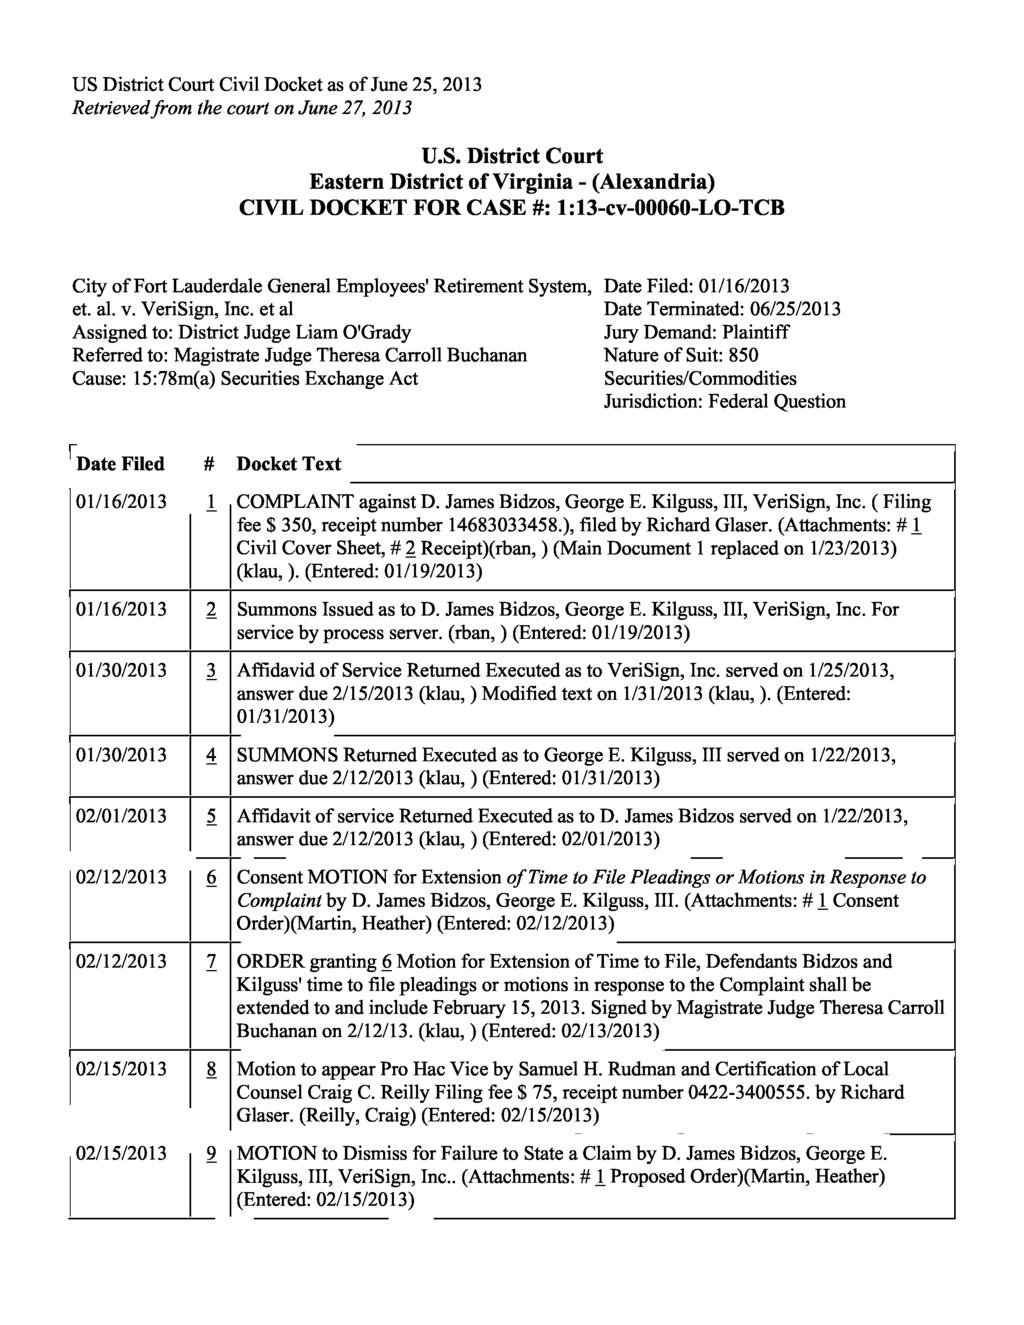 US District Court Civil Docket as of June 25, 2013 Retrieved from the court on June 27, 2013 U.S. District Court Eastern District of Virginia - (Alexandria) CIVIL DOCKET FOR CASE #: 1:13-cv-00060-LO-TCB City of Fort Lauderdale General Employees' Retirement System, Date Filed: 01/16/2013 et.